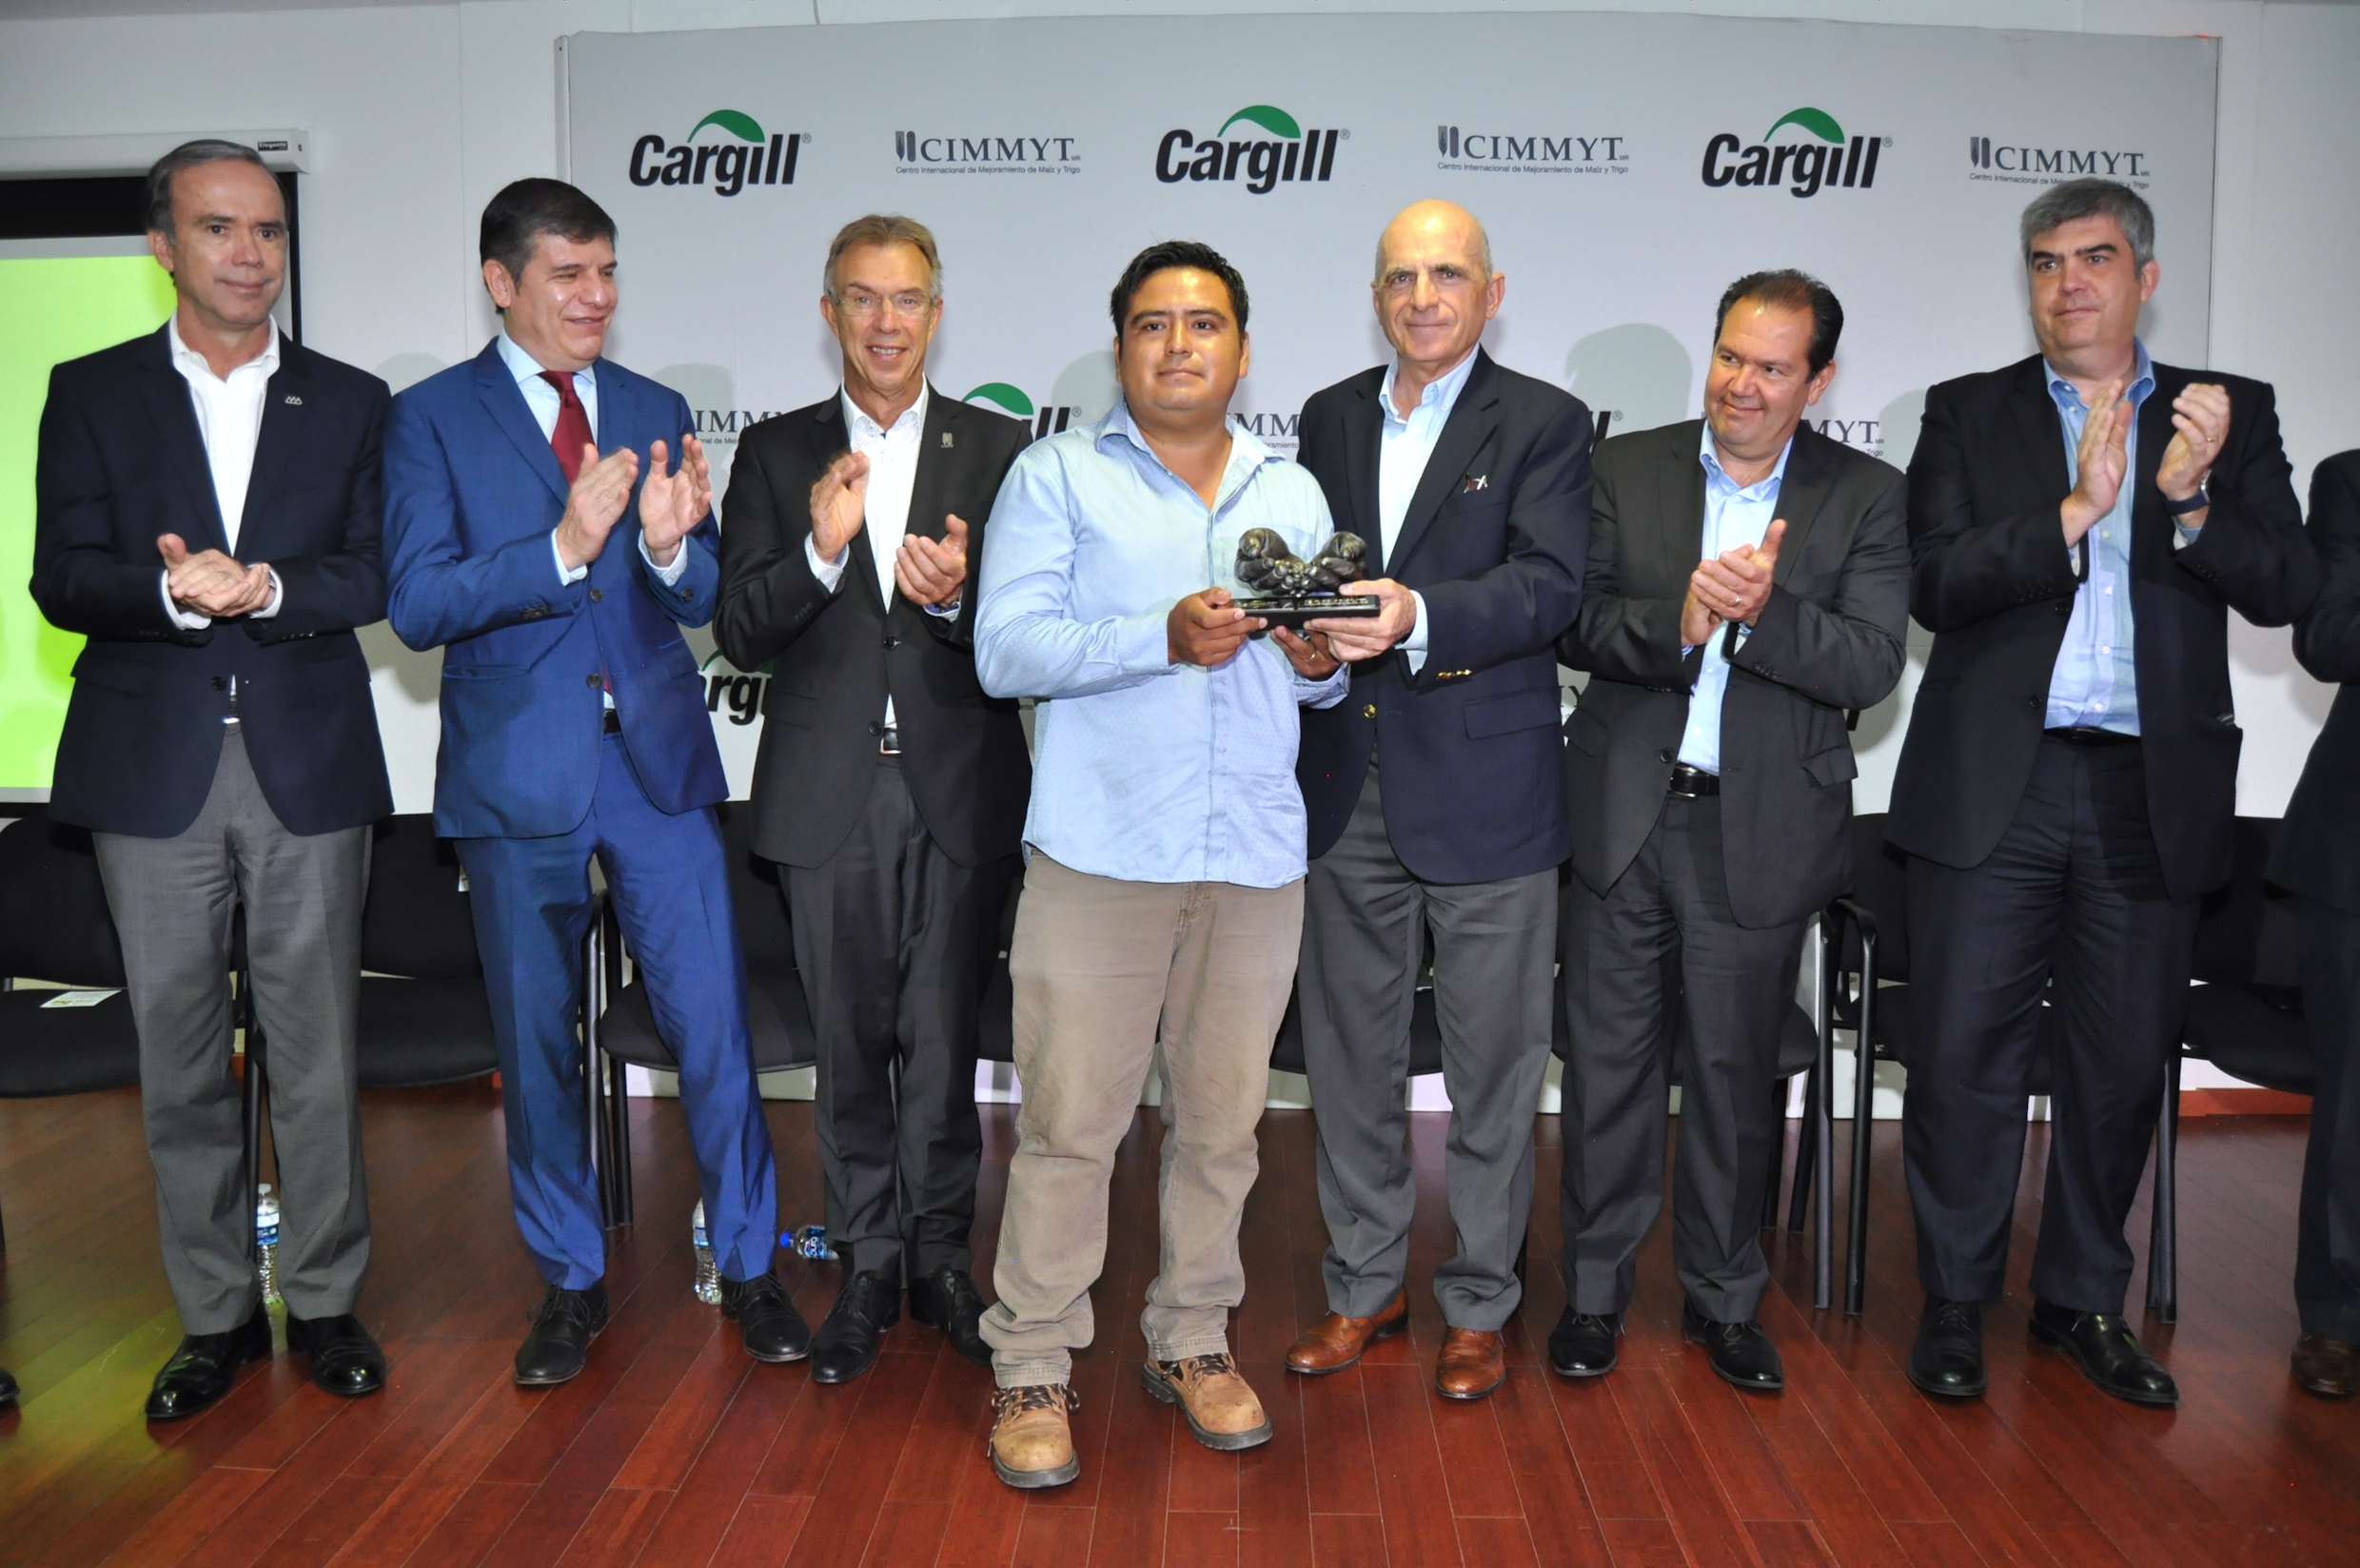 Carlos Barragán (center) receives the Cargill-CIMMYT Award, in the Farmers category. Behind him are representatives from the organizations in the jury (from left to right): Bosco de la Vega, President of Mexico’s National Agriculture Council; David Hernández, Global Chief Procurement Officer of Grupo Bimbo; Martin Kropff, Director General of CIMMYT; Jorge Zertuche, Mexico’s Undersecretary of Agriculture; Marcelo Martins, President of Cargill Mexico; and José Sáenz, Chief of Staff to the Secretary of Economy. (Photo: CIMMYT)